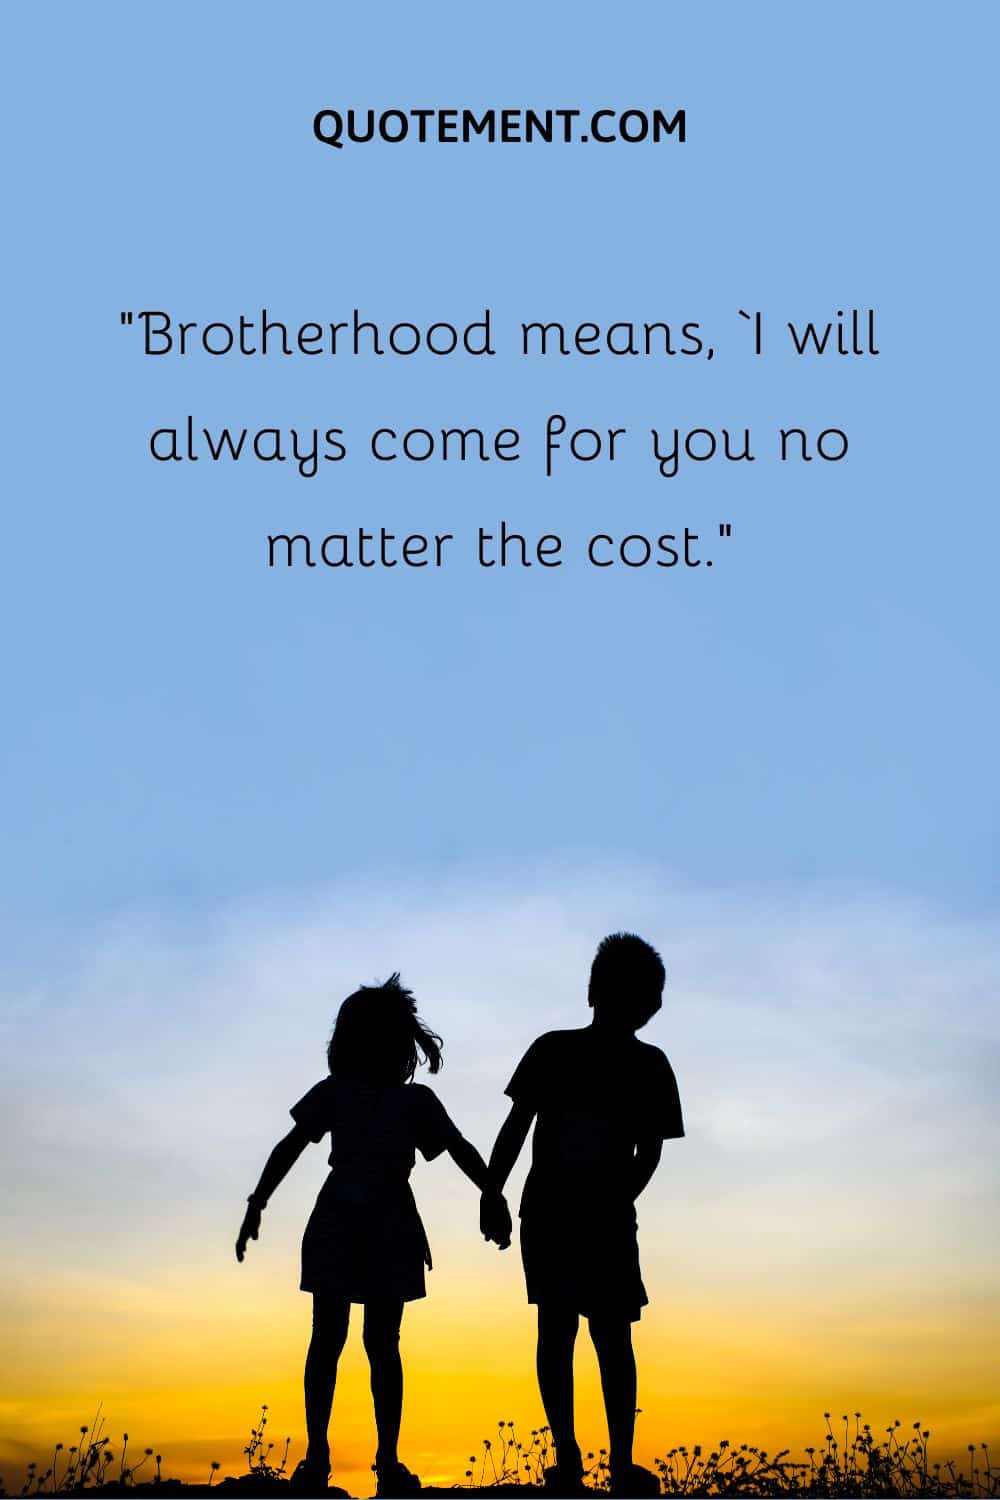 “Brotherhood means, ‘I will always come for you no matter the cost.’”